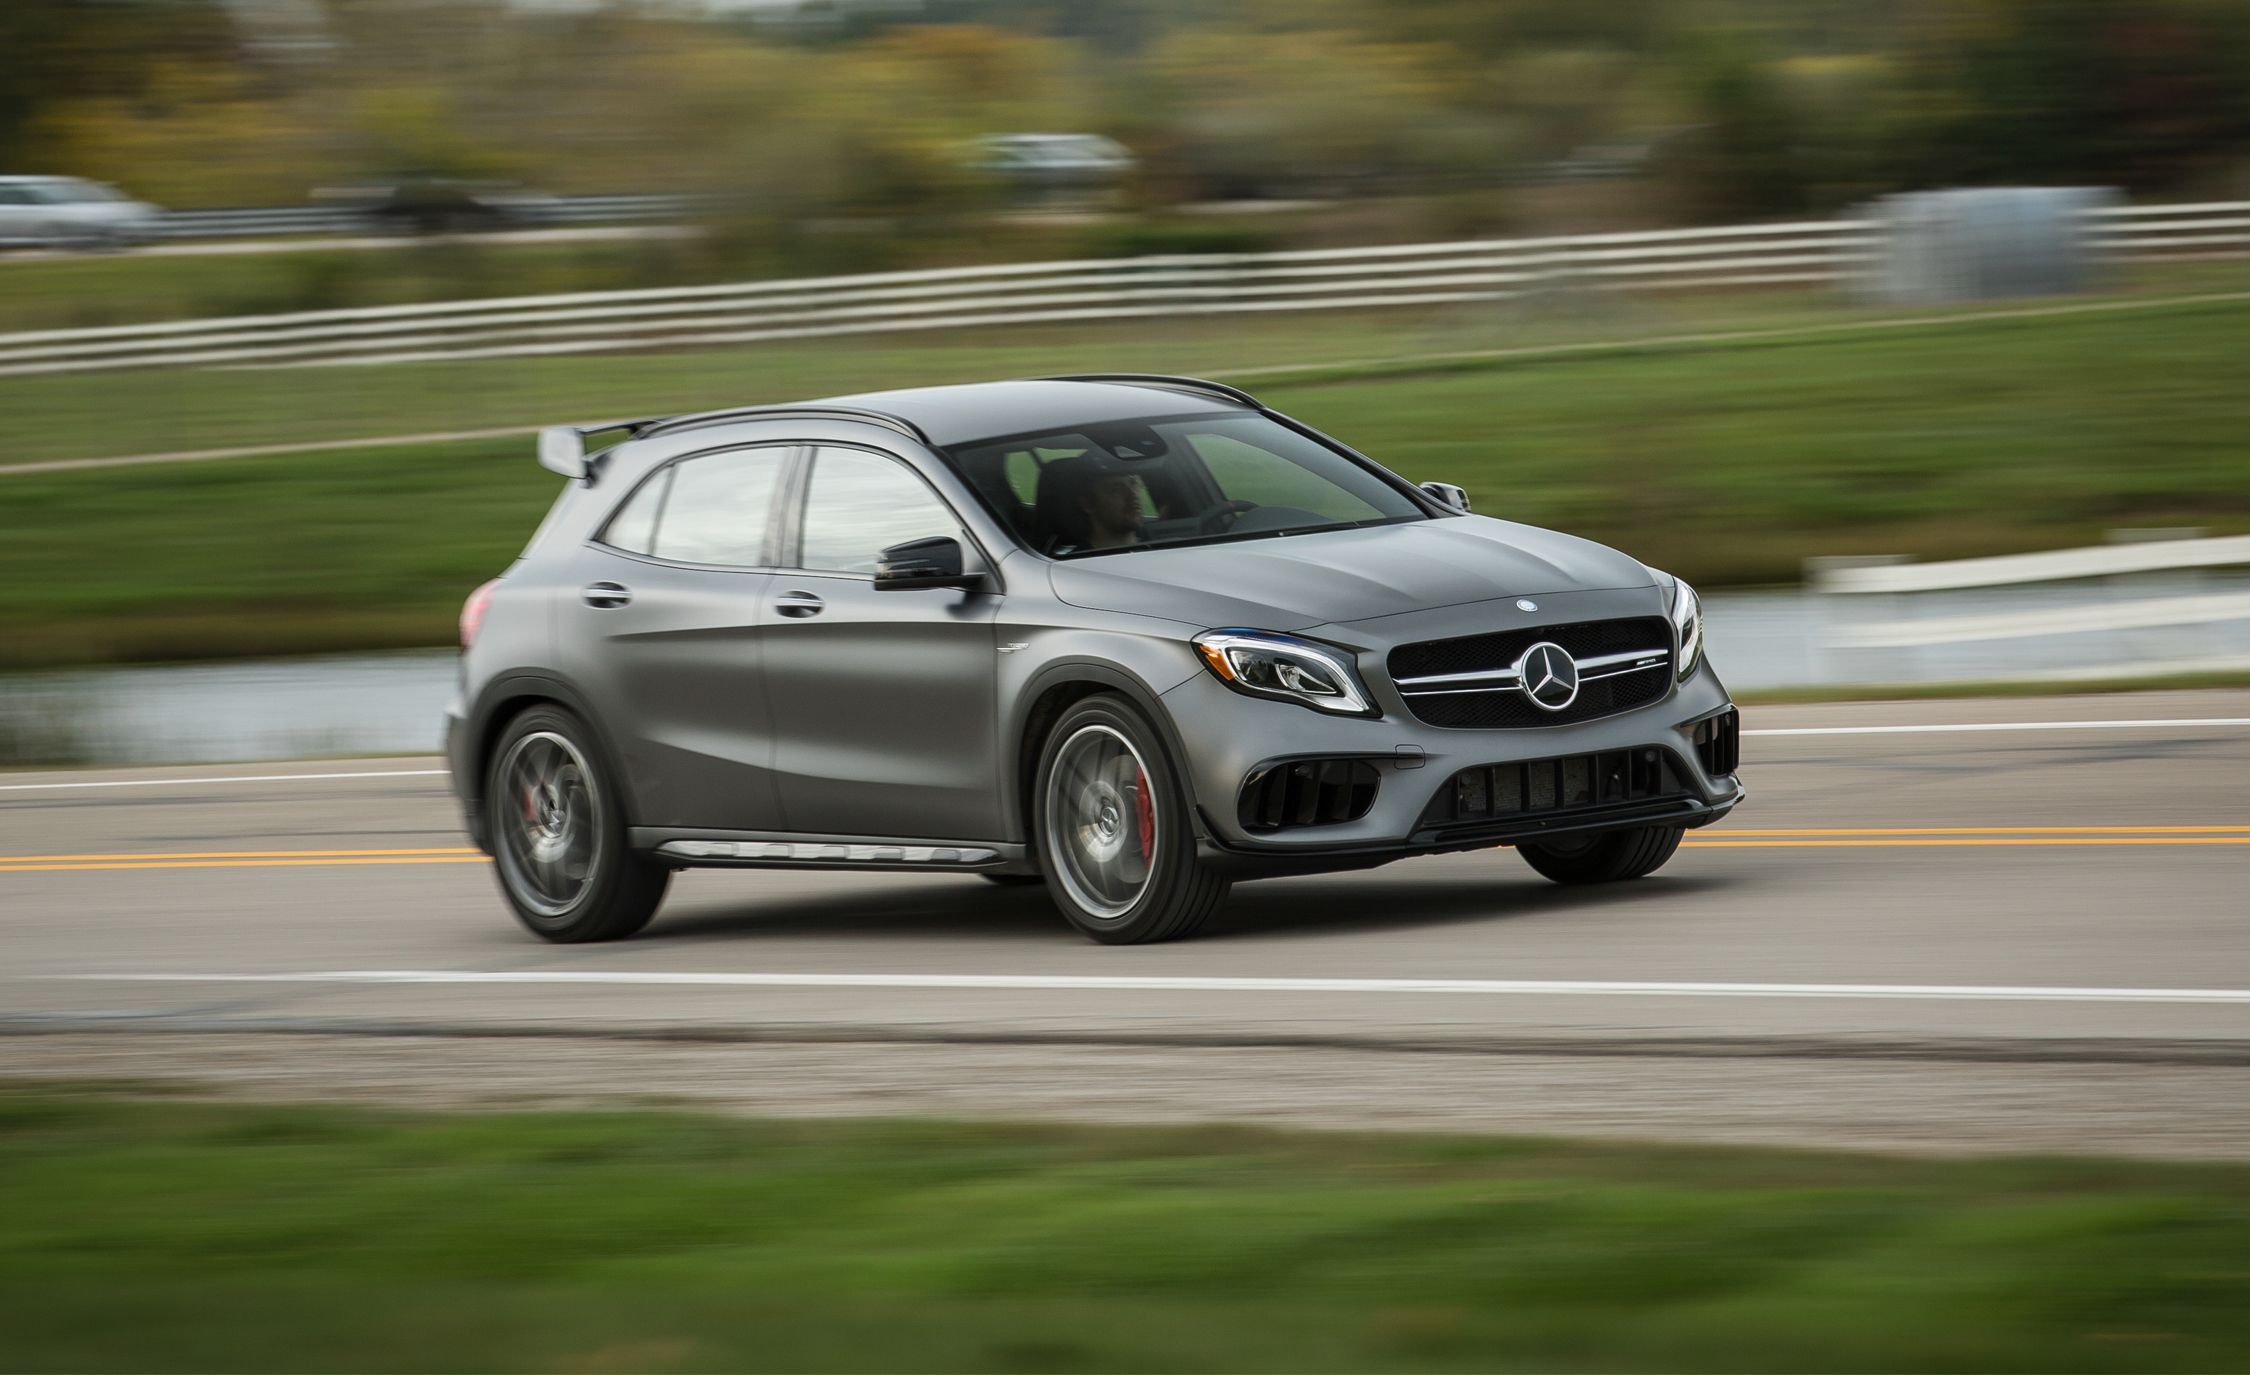 Mercedes-AMG GLA45 on the highway